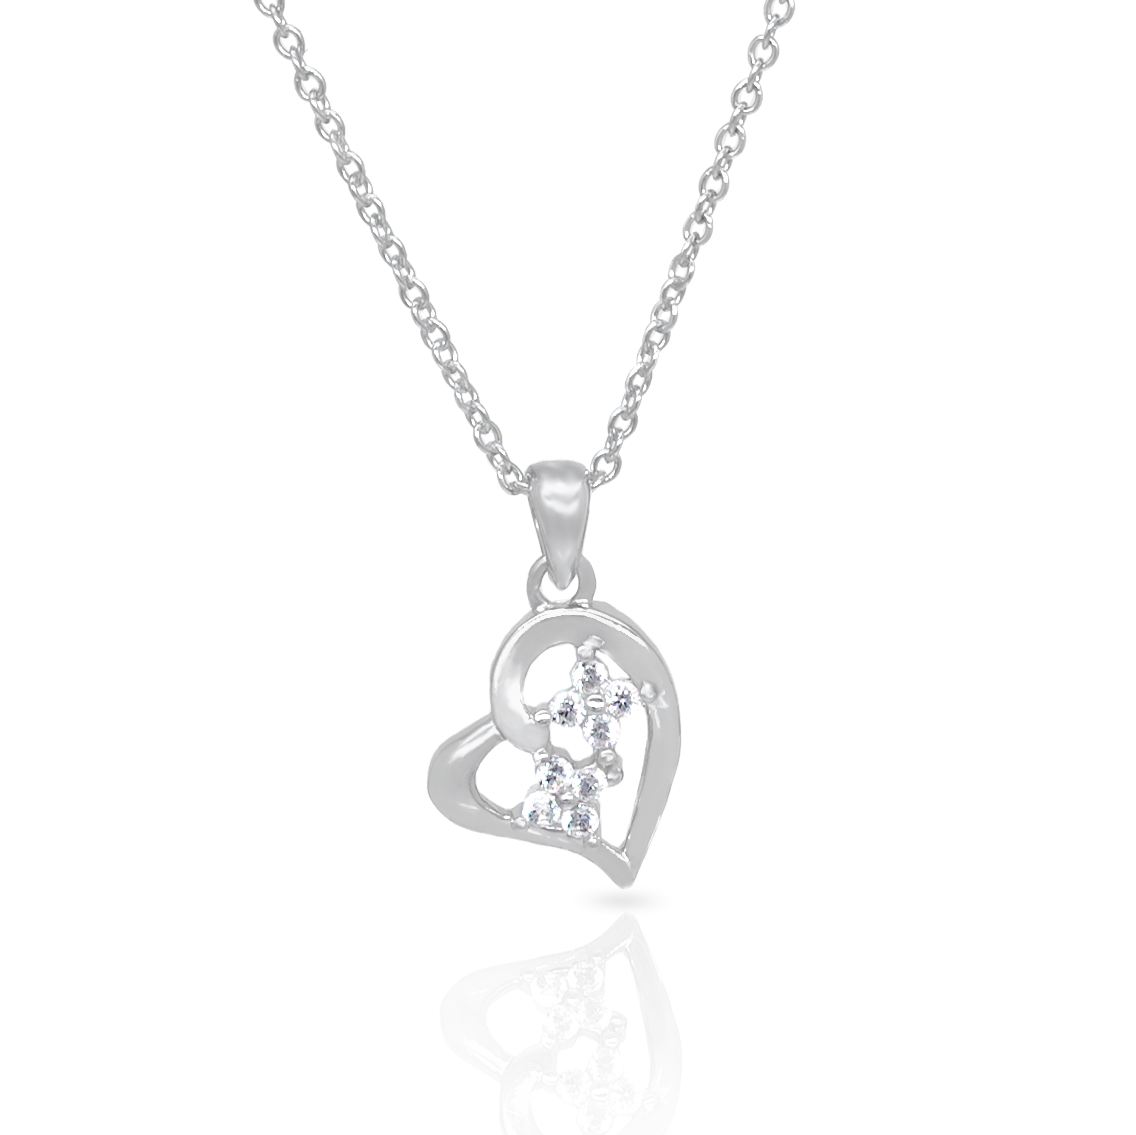 Heart Charm Necklace in Sterling Silver by Tilo Jewelry